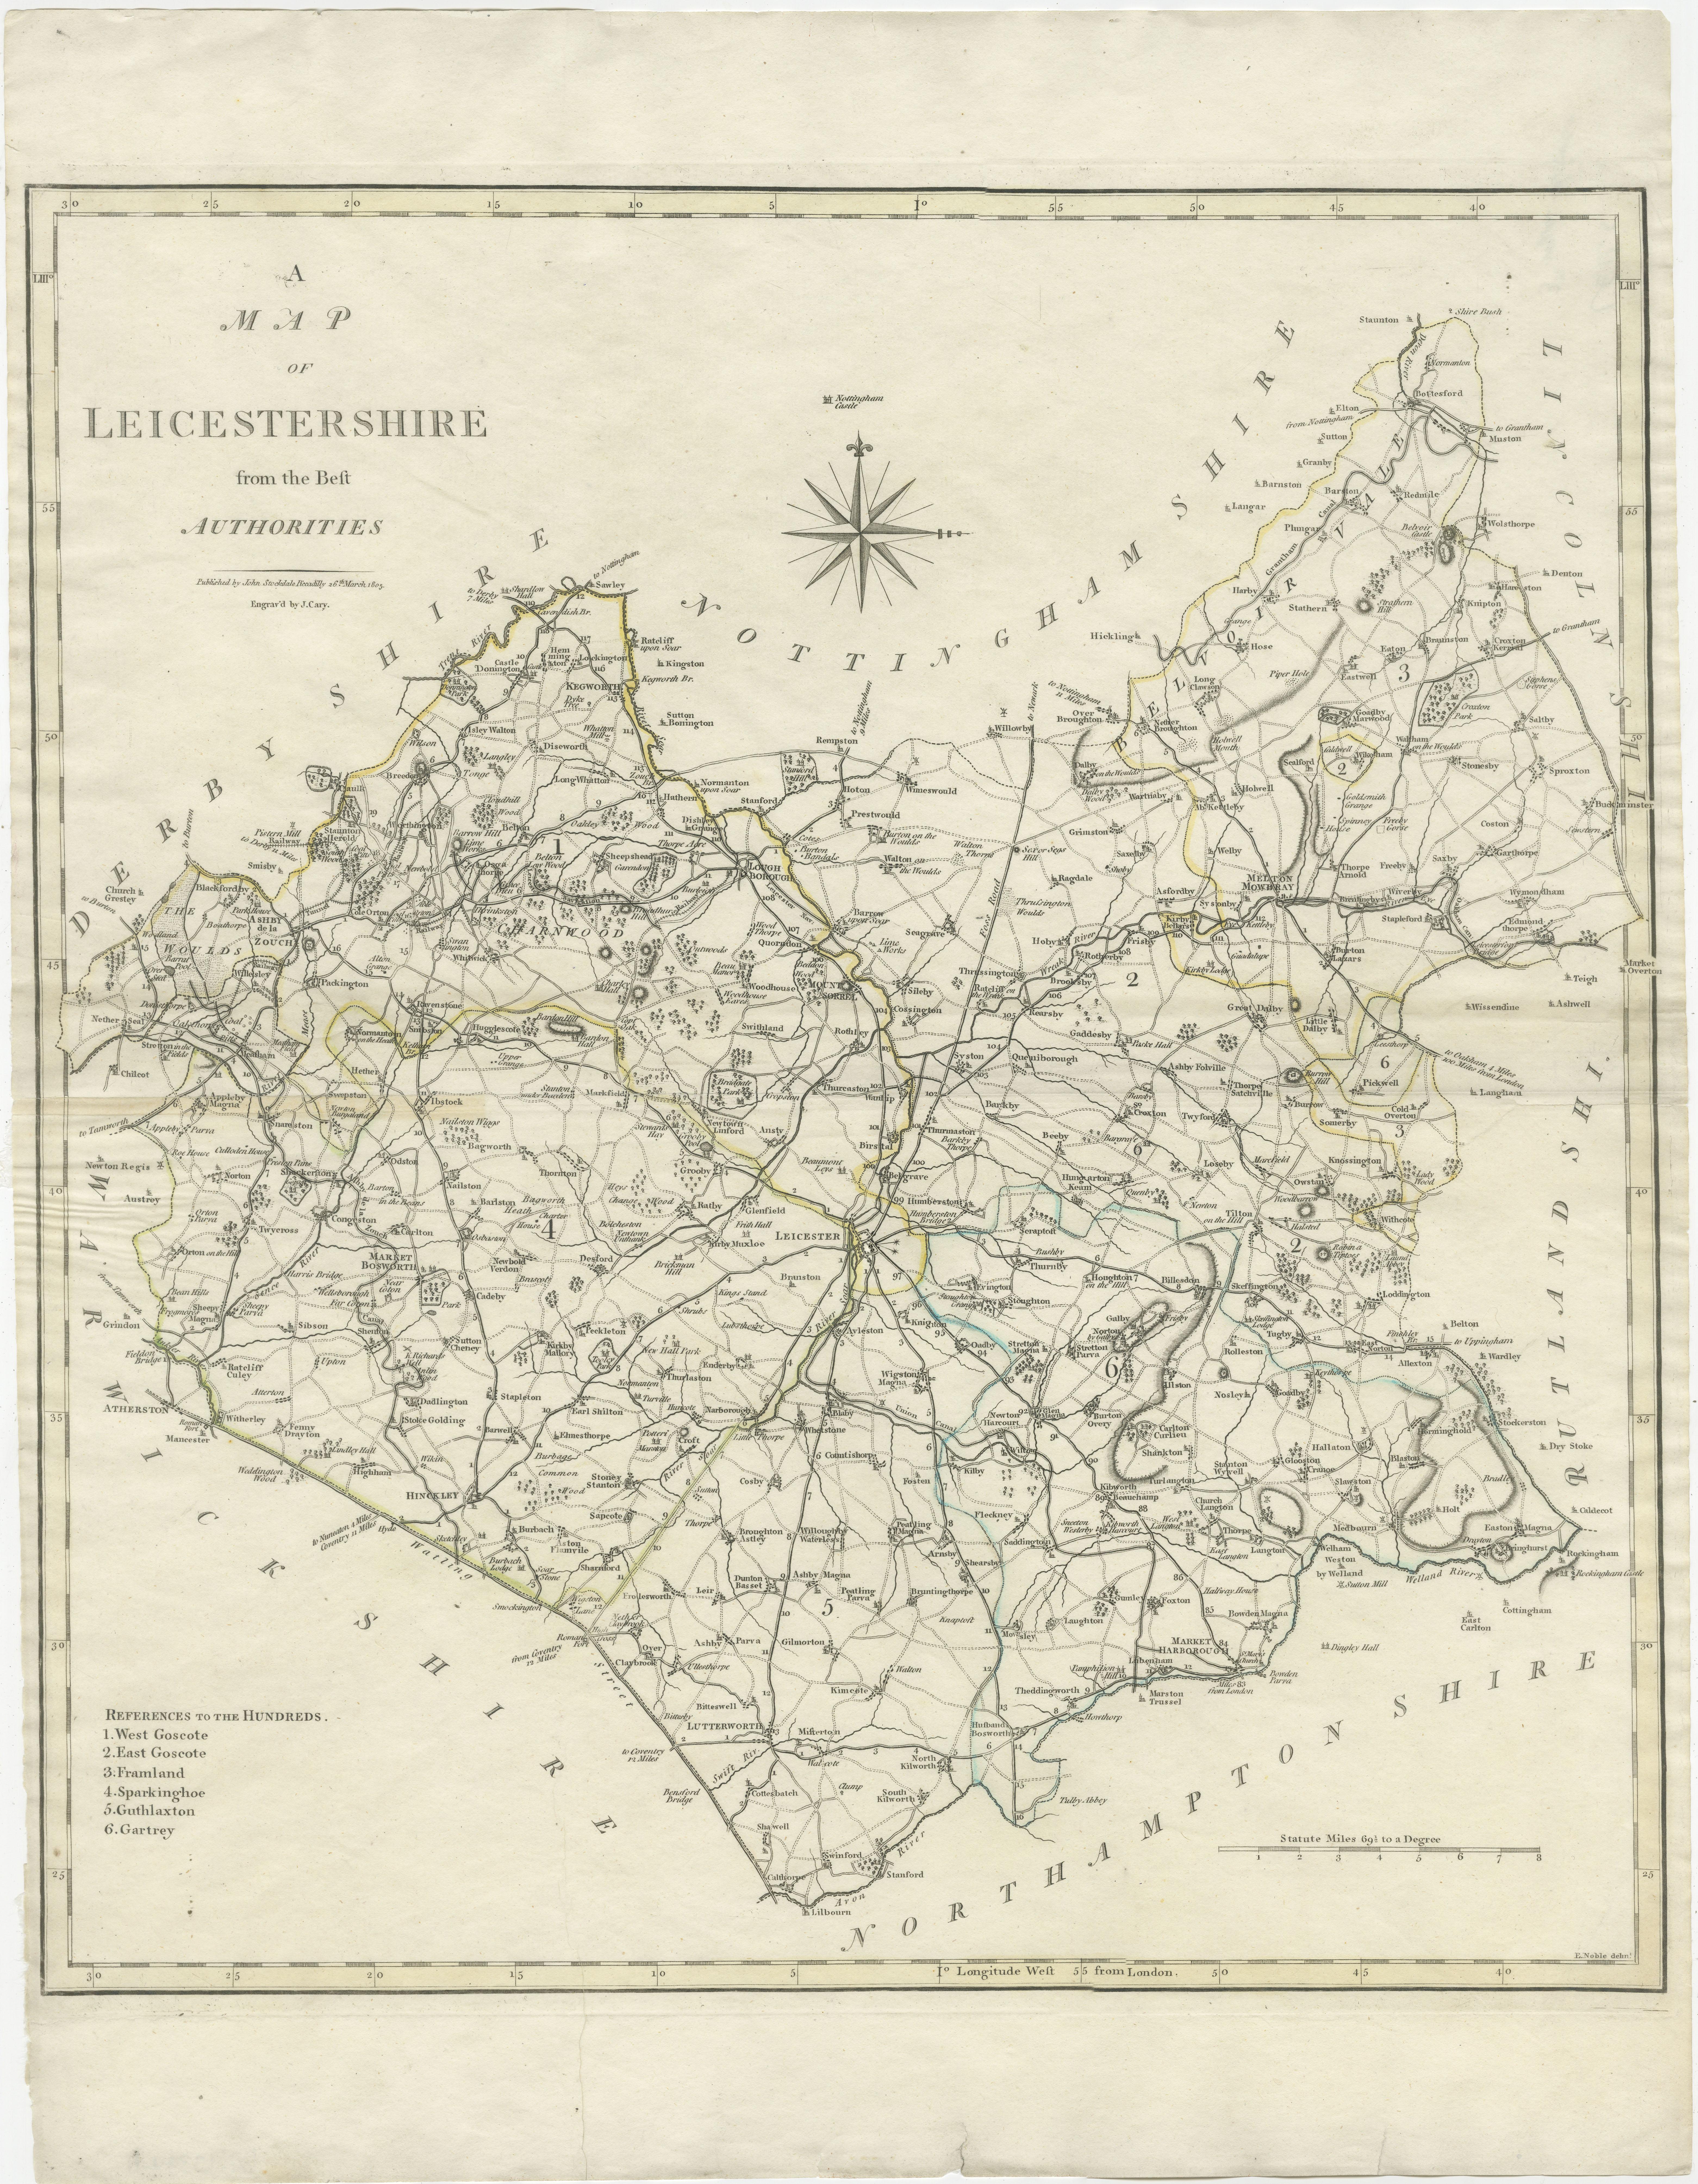 Antique map titled 'A Map of Leicestershire from the best Authorities'. Original old county map of Leicestershire, England. Engraved by John Cary. Originates from 'New British Atlas' by John Stockdale, published 1805. 

John Cary (1755-1835) was a